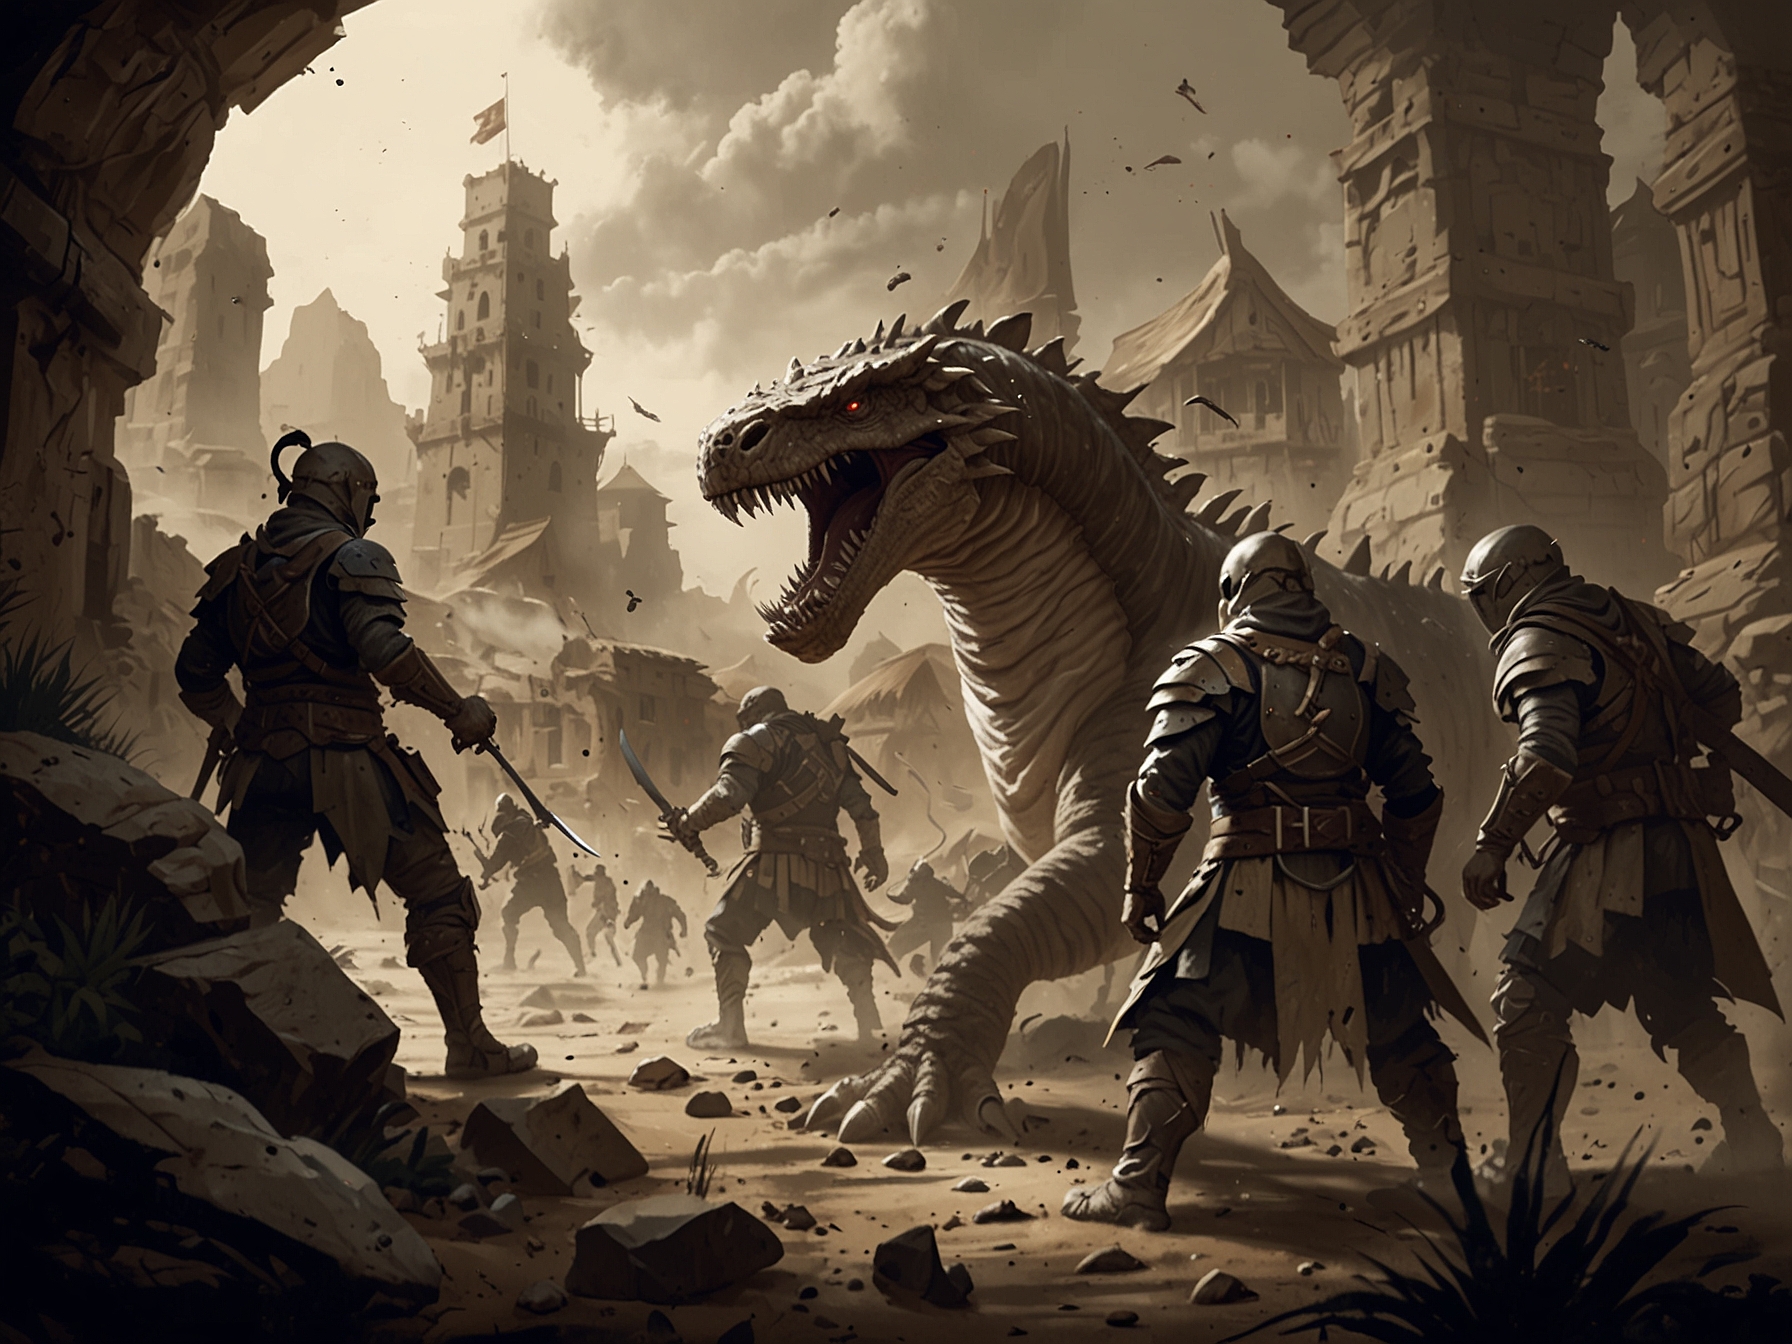 Players engage in real-time strategy and role-playing combat, navigating intricate political intrigues and epic battles with familiar elements like spice mining and sandworm encounters.